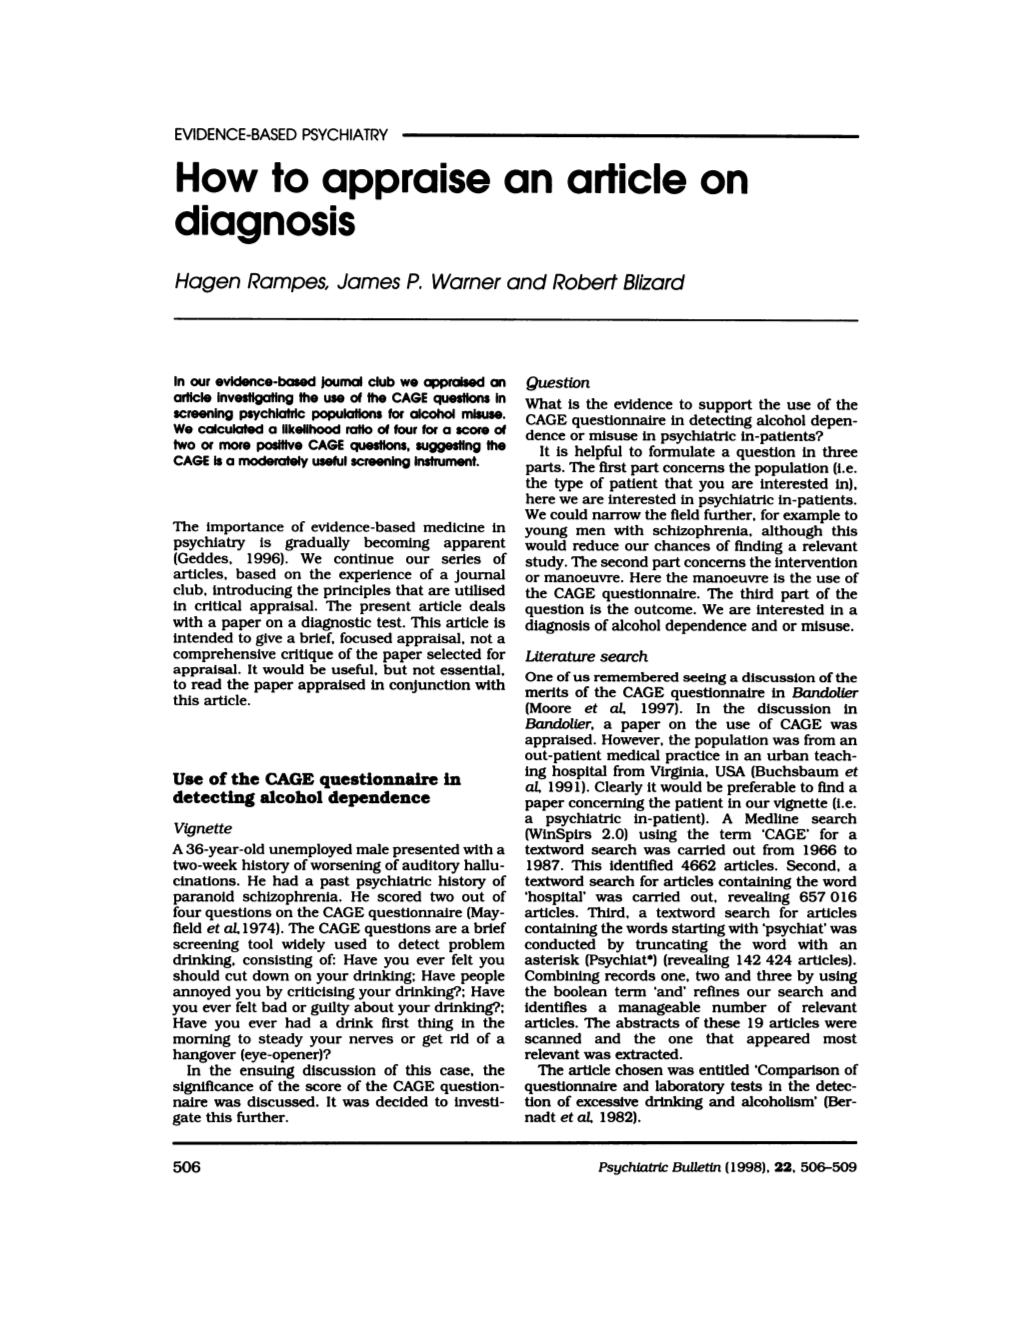 How to Appraise an Article on Diagnosis